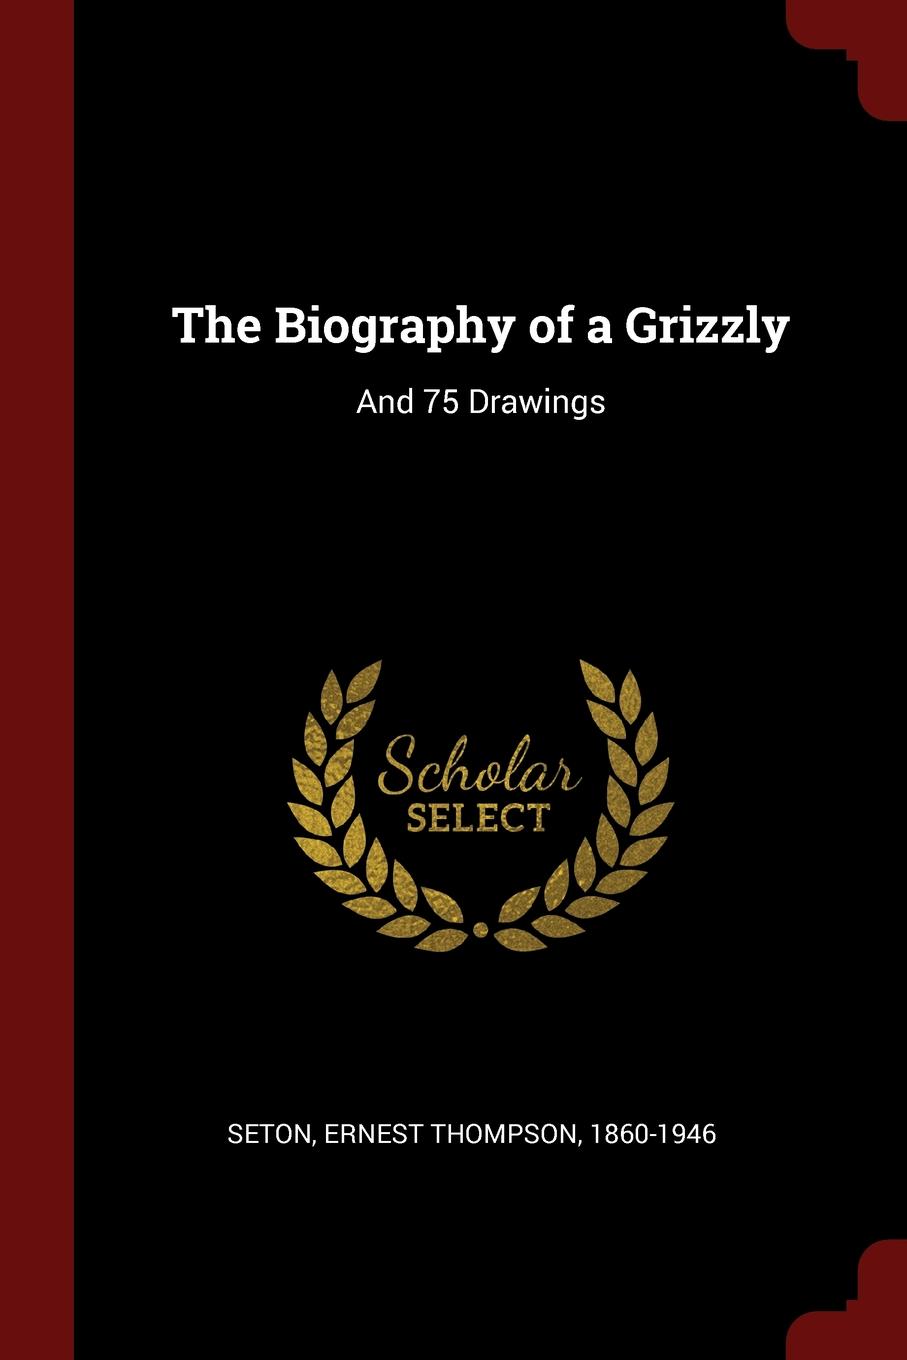 The Biography of a Grizzly. And 75 Drawings